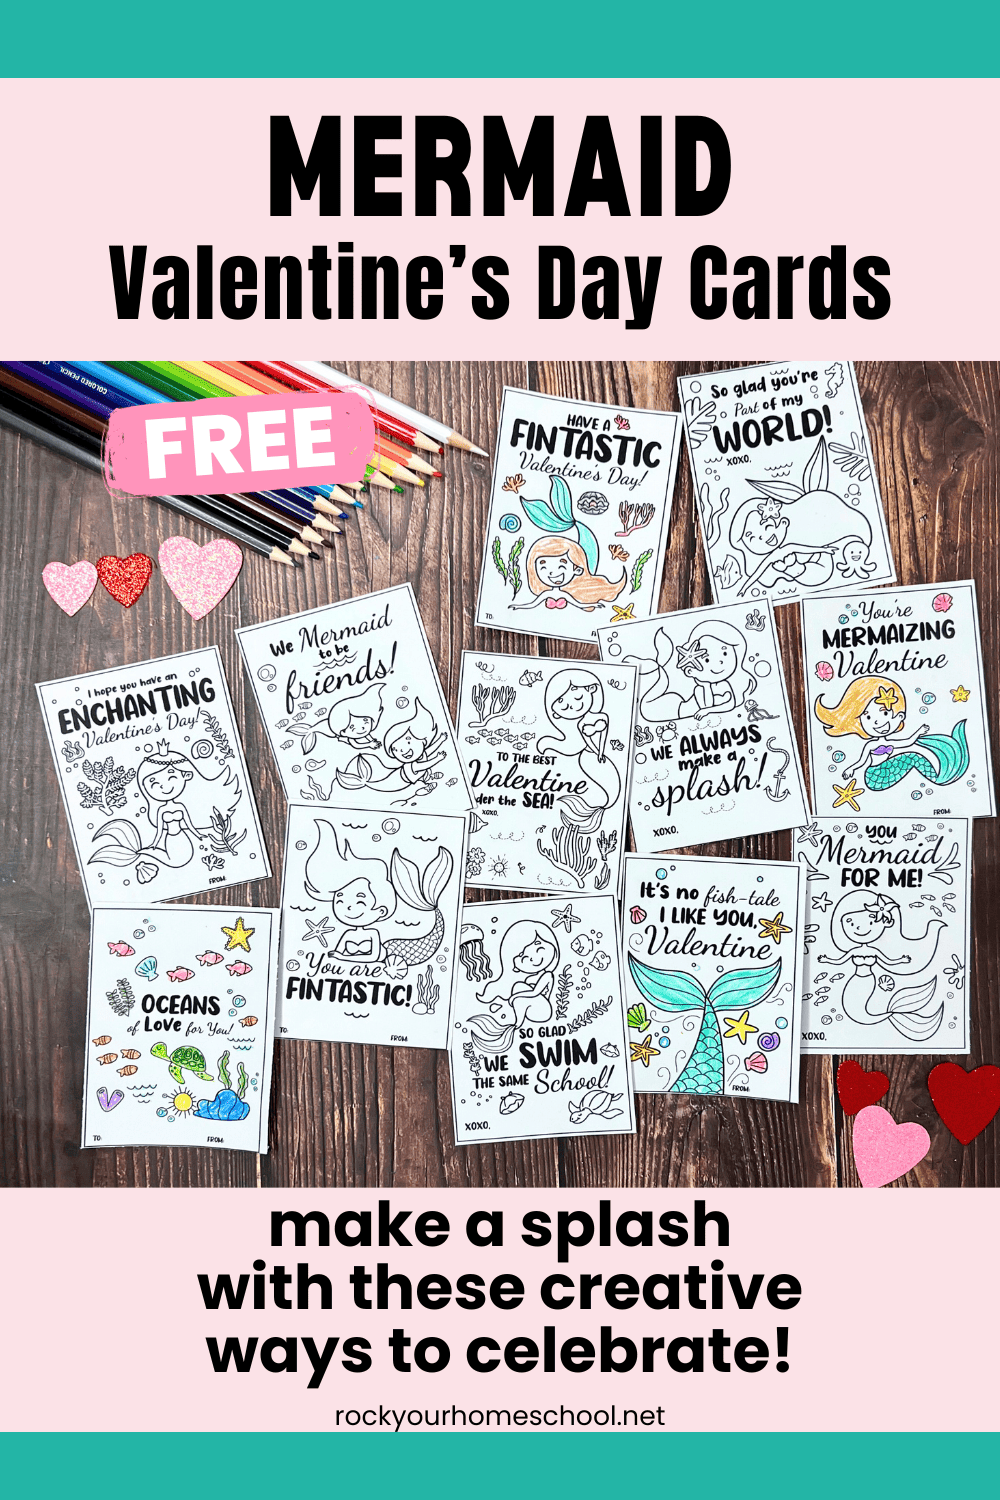 Mermaid Valentine's Day Cards for Kids (12 Free)